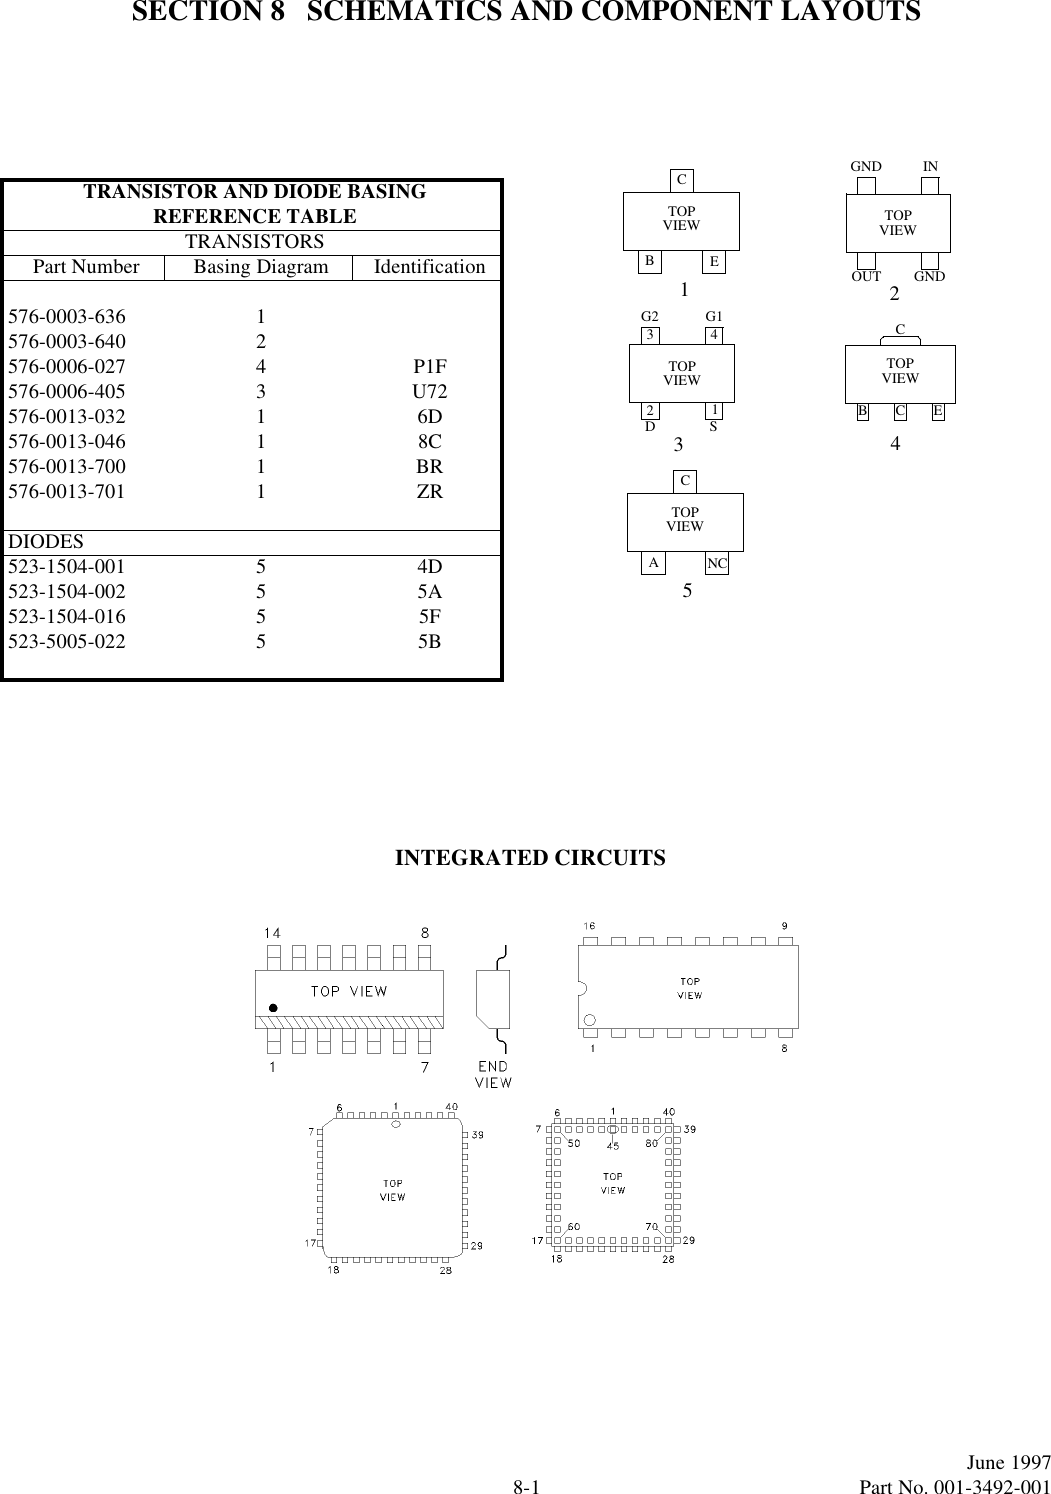 8-1June 1997  Part No. 001-3492-001SECTION 8   SCHEMATICS AND COMPONENT LAYOUTSTRANSISTOR AND DIODE BASINGREFERENCE TABLETRANSISTORSPart Number Basing Diagram Identification576-0003-636 1576-0003-640 2576-0006-027 4P1F576-0006-405 3U72576-0013-032 16D576-0013-046 18C576-0013-700 1BR576-0013-701 1ZRDIODES523-1504-001 54D523-1504-002 55A523-1504-016 55F523-5005-022 55BTOPVIEWCBE1TOPVIEWCCEB4TOPVIEW5ANCCTOPVIEWINGNDGNDOUT 2TOPVIEWG1G2SD3123 4INTEGRATED CIRCUITS